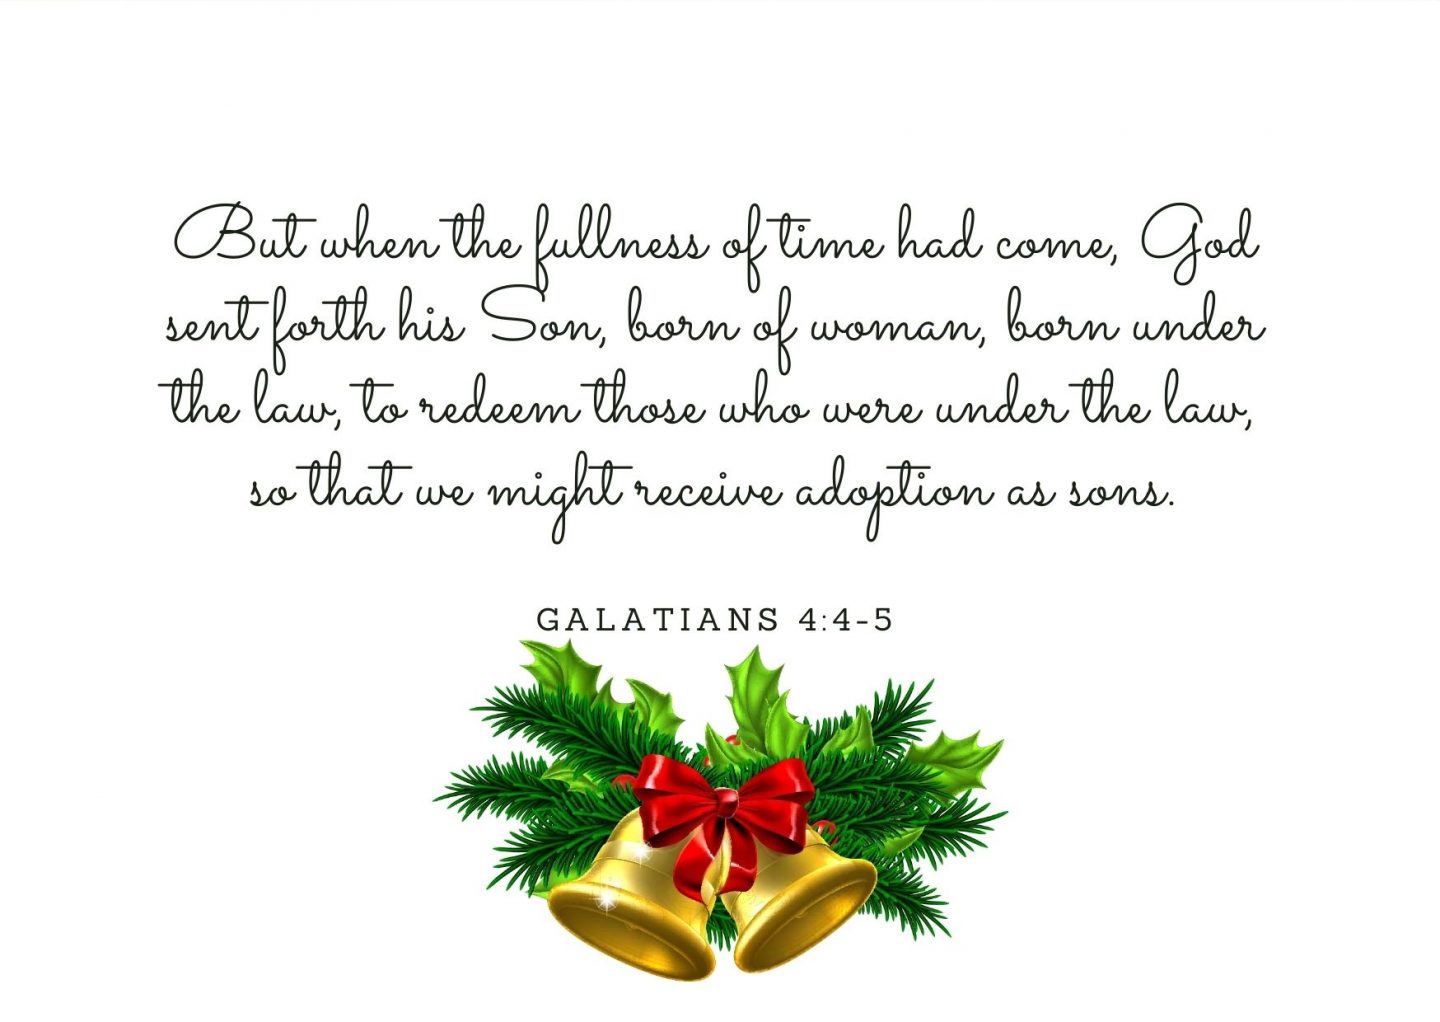 But when the fullness of time had come, God sent forth his Son, born of woman, born under the law, to redeem those who were under the law, so that we might receive adoption as sons. Galatians 4:4-5